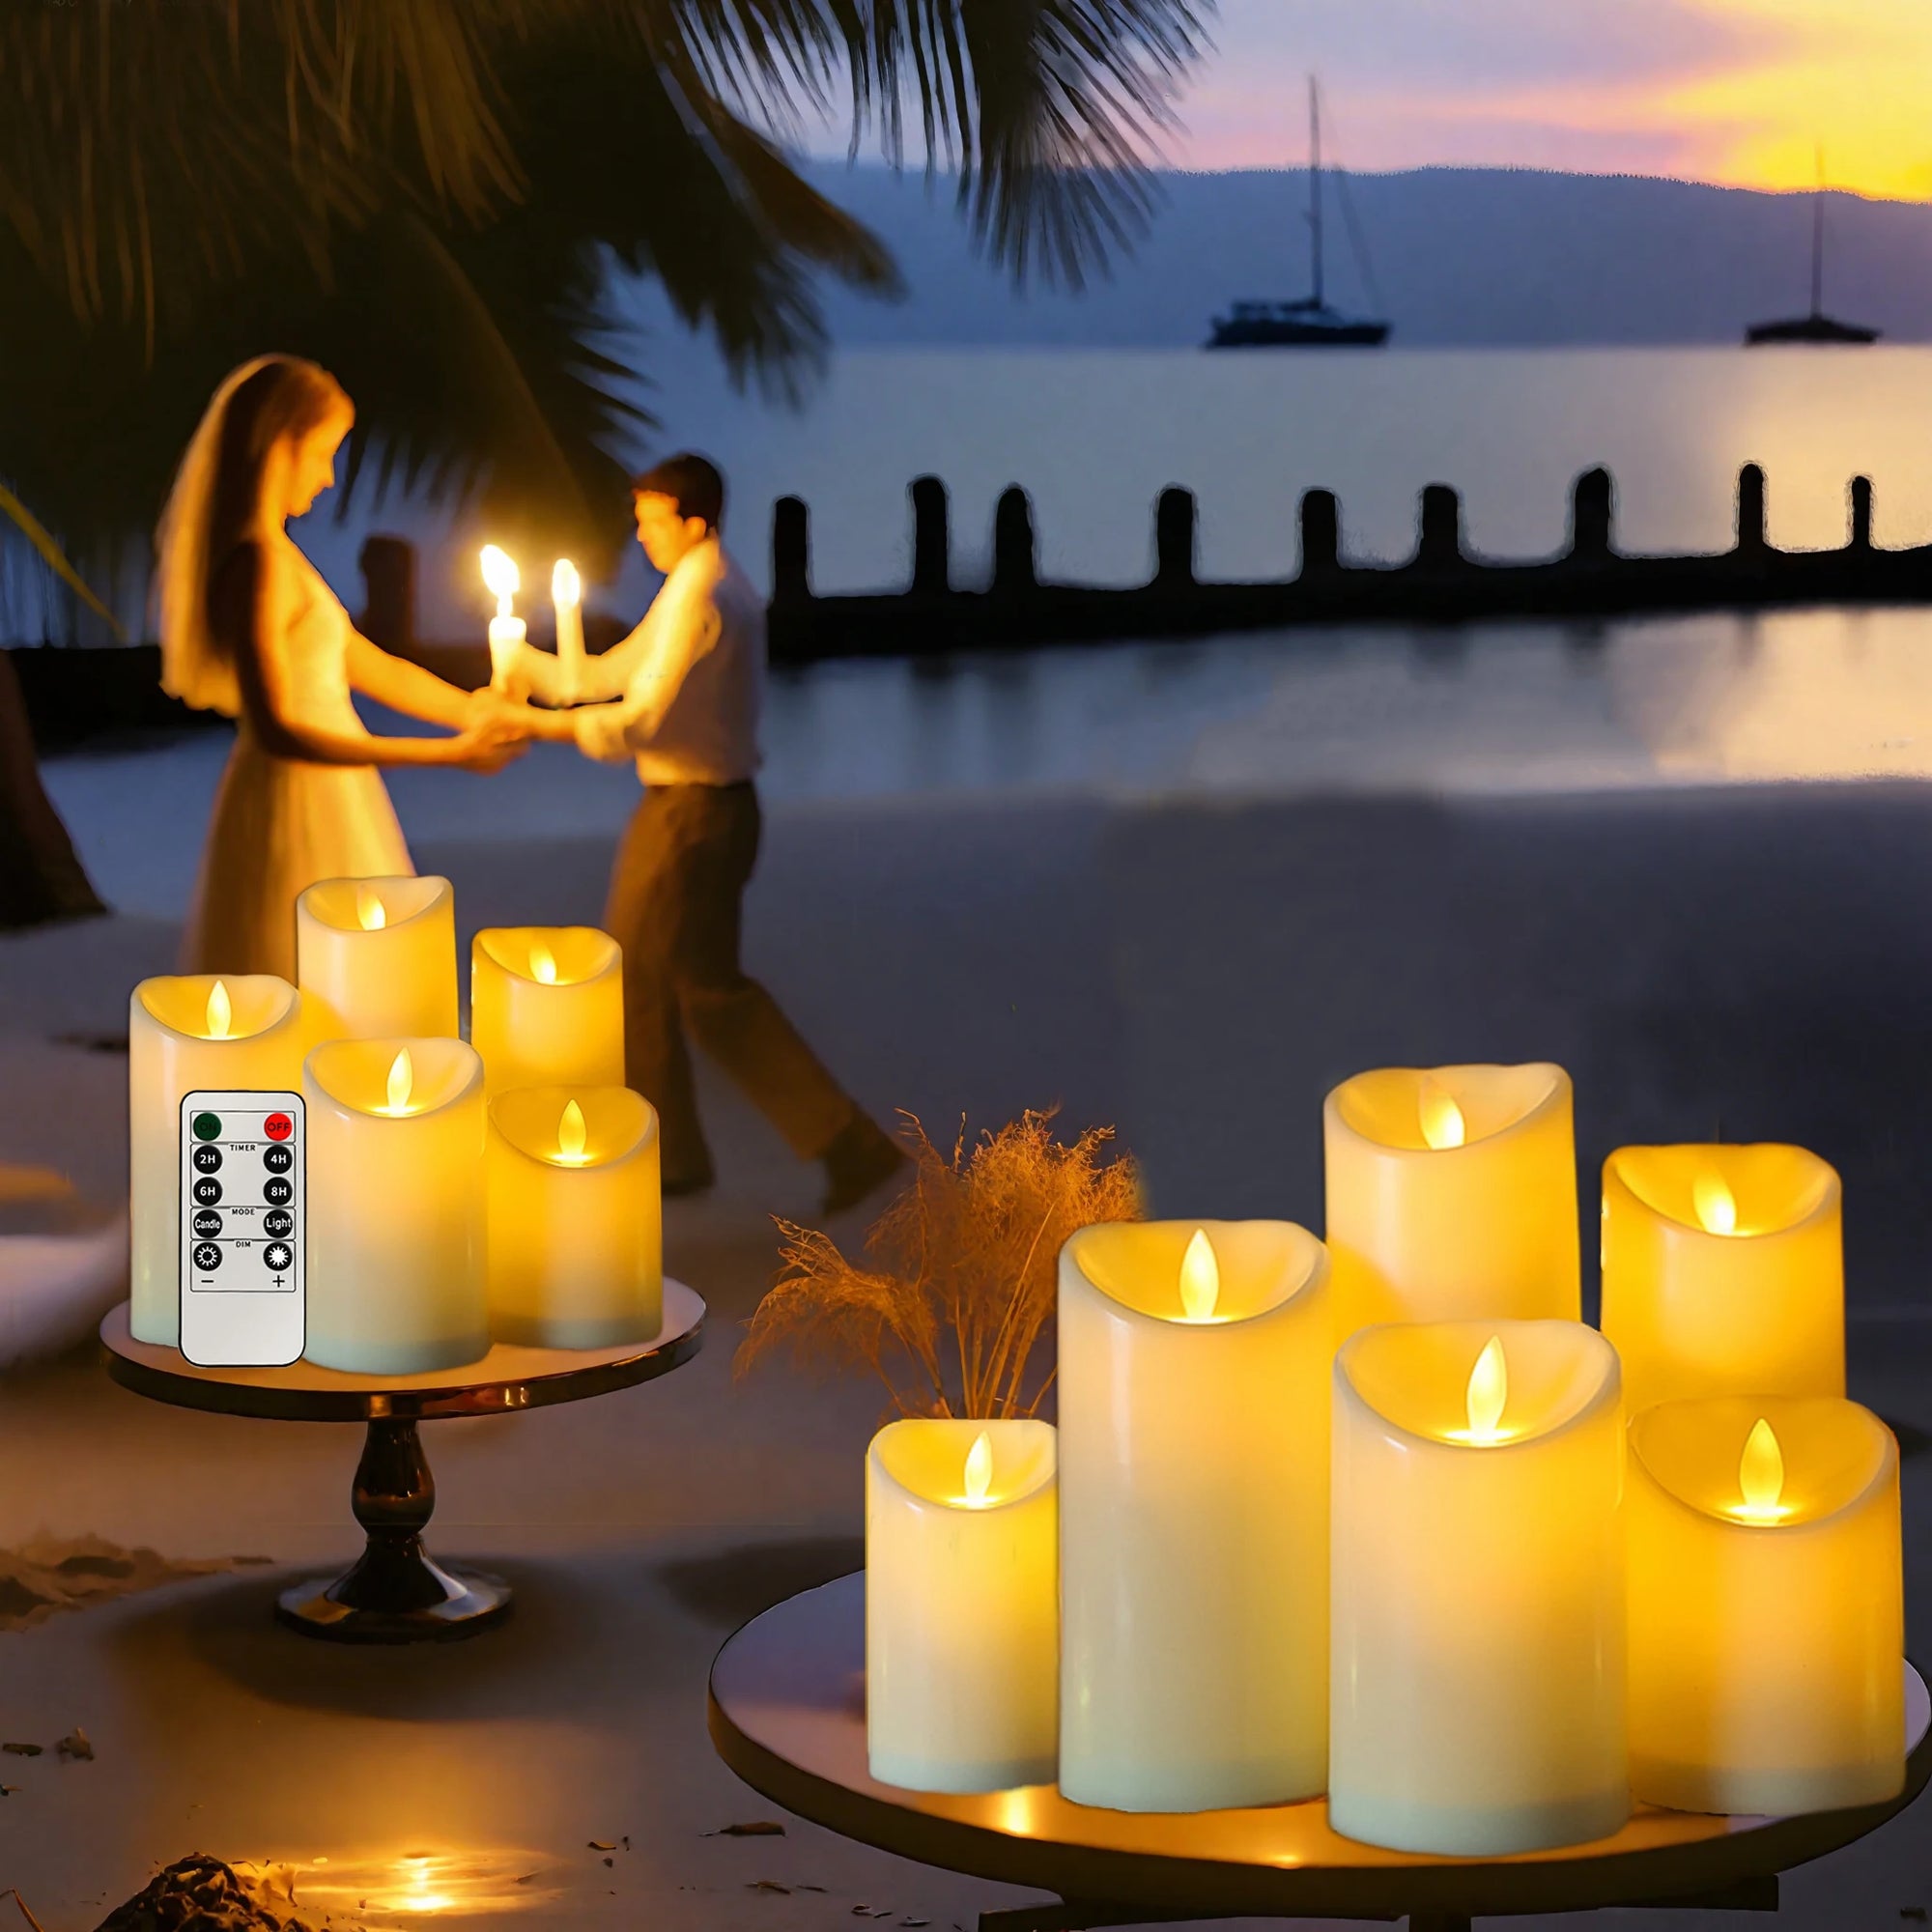 Buy LED Flameless Candles with Real Flame Effect & Remote - HOMAURA®